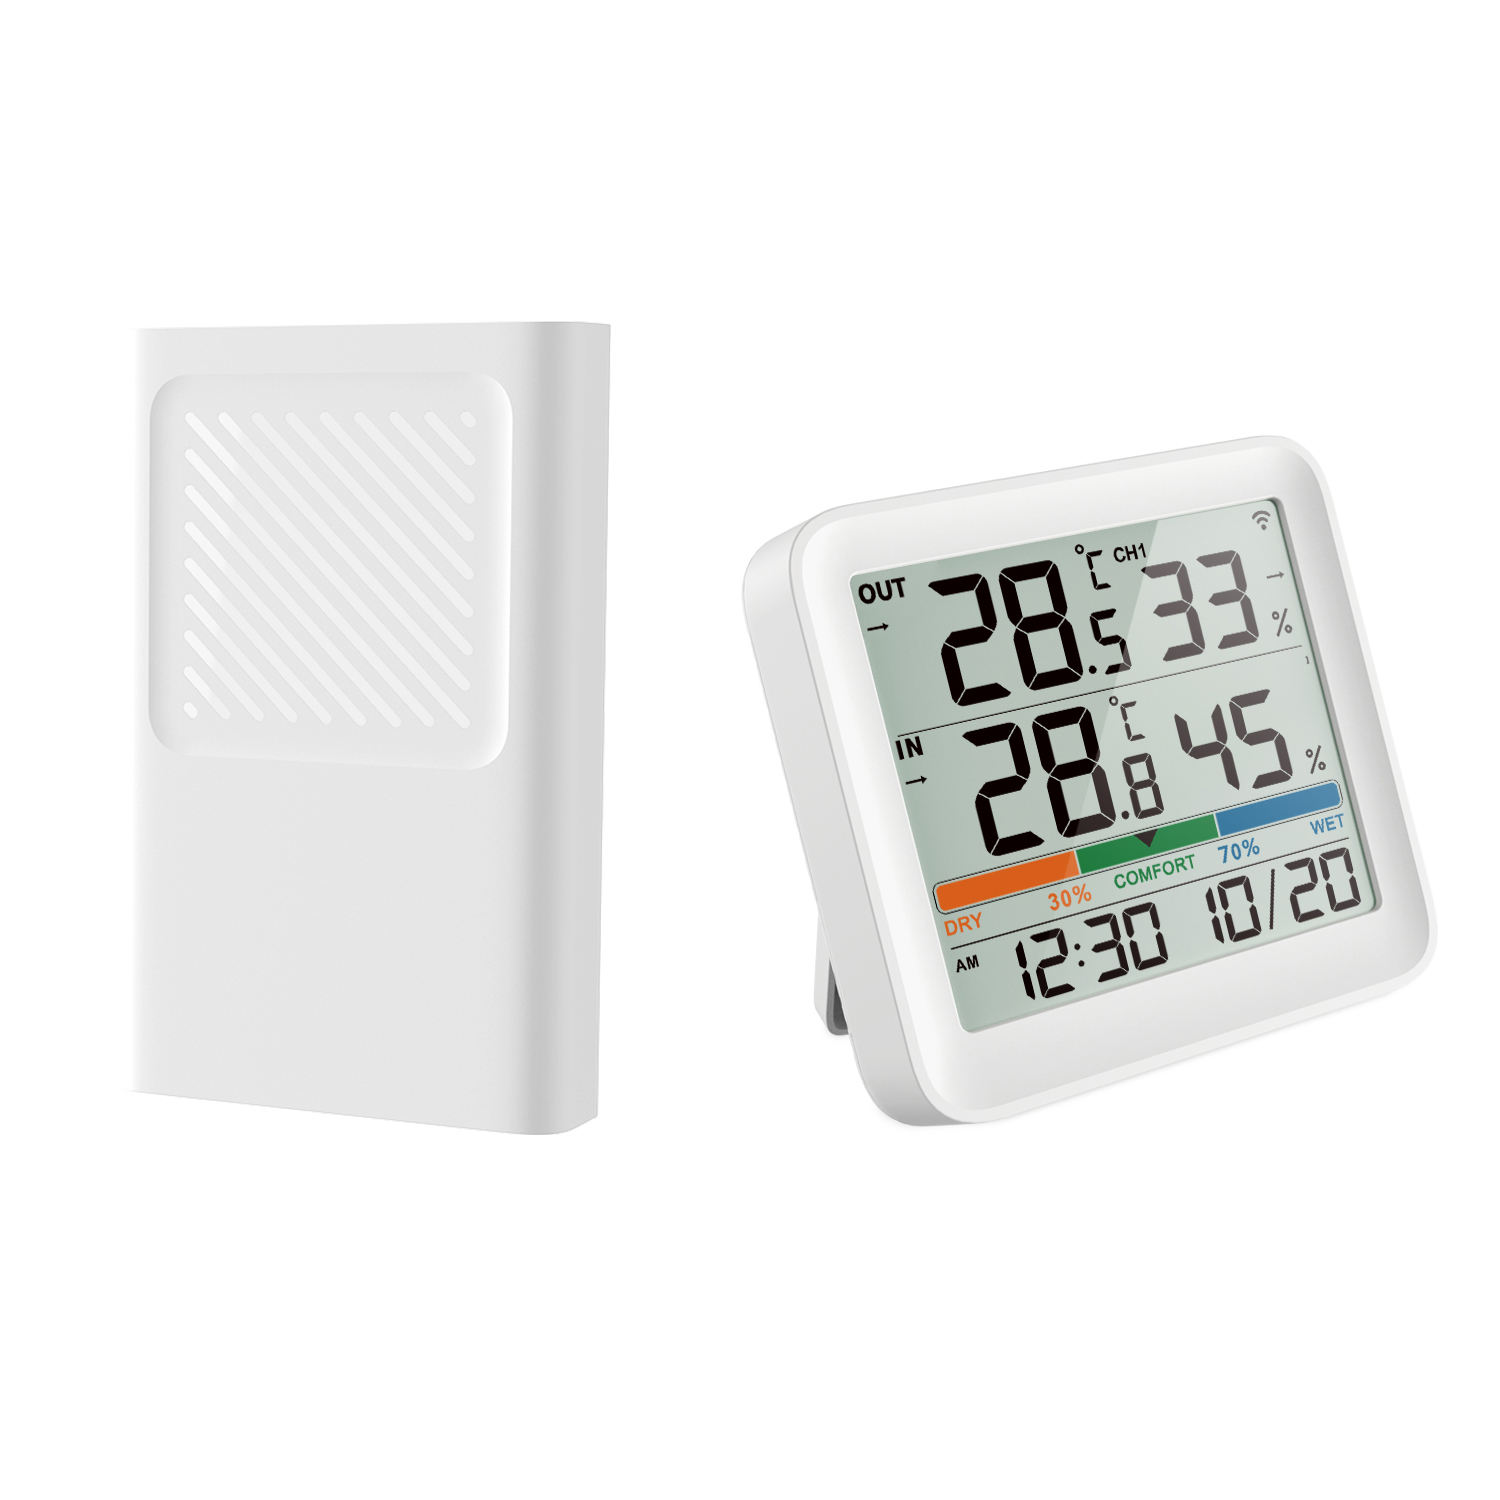 Wireless Weather Station Clock Alarm China Factory Supplied Top Quality Color Hygrometer Thermometer Weather Station